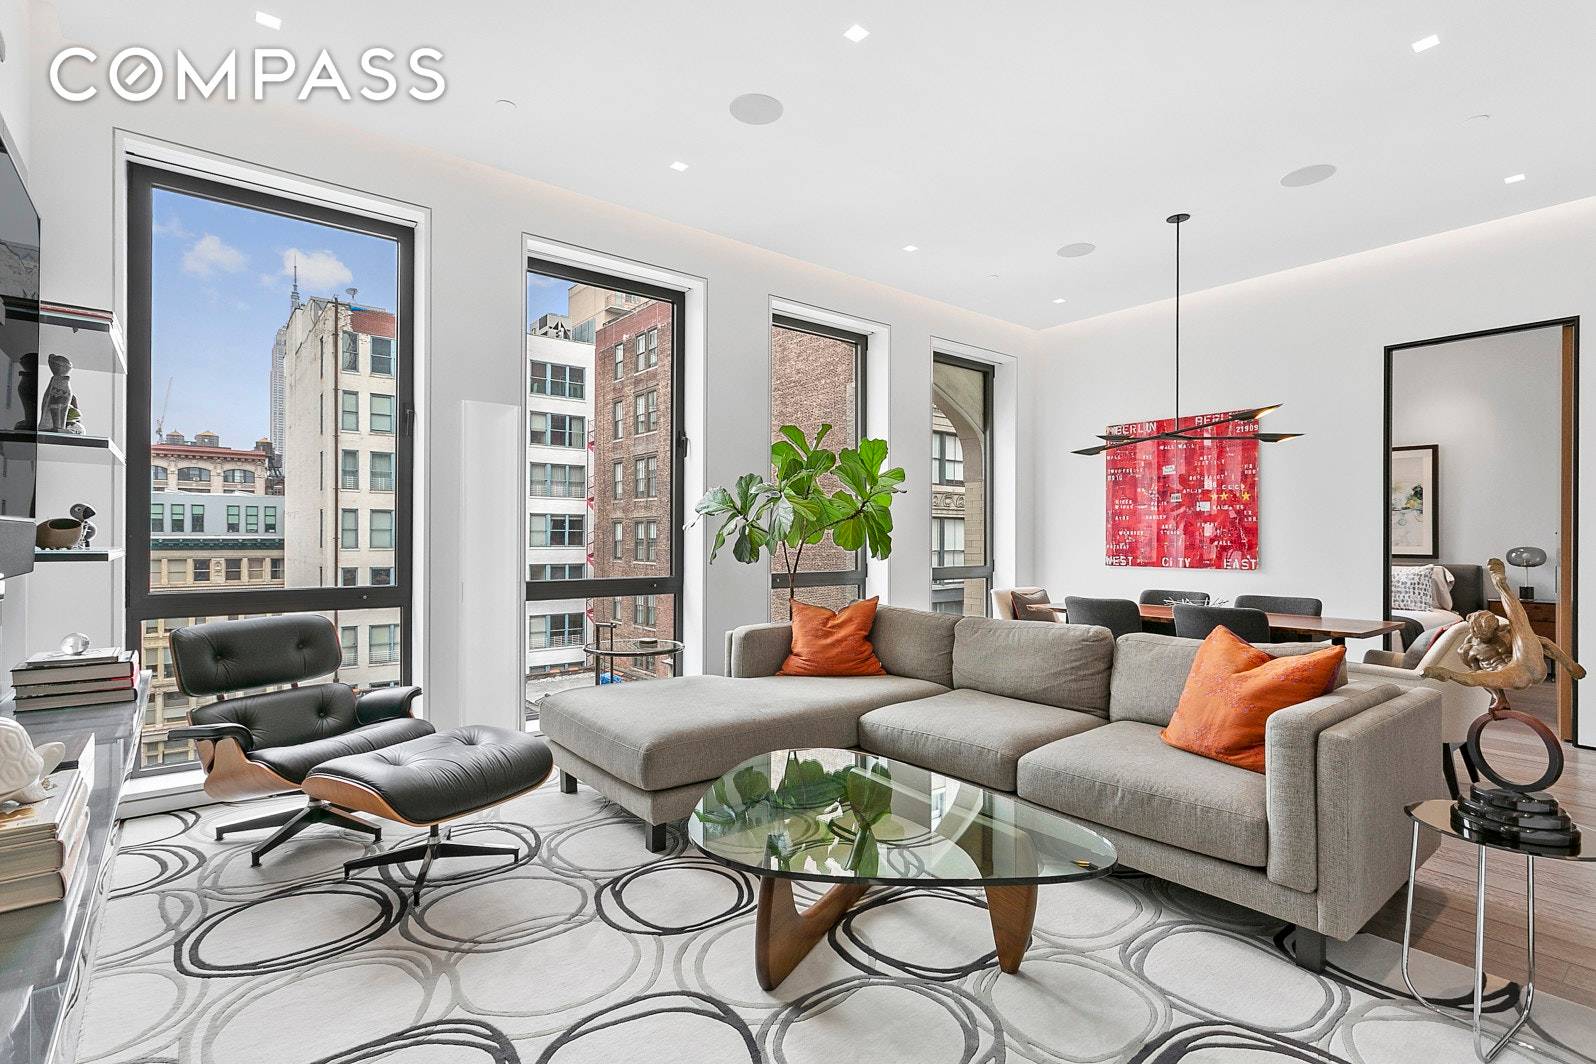 This Bright and Spacious Three Bedroom Two Full Bath Flatiron Loft will take your breath away.